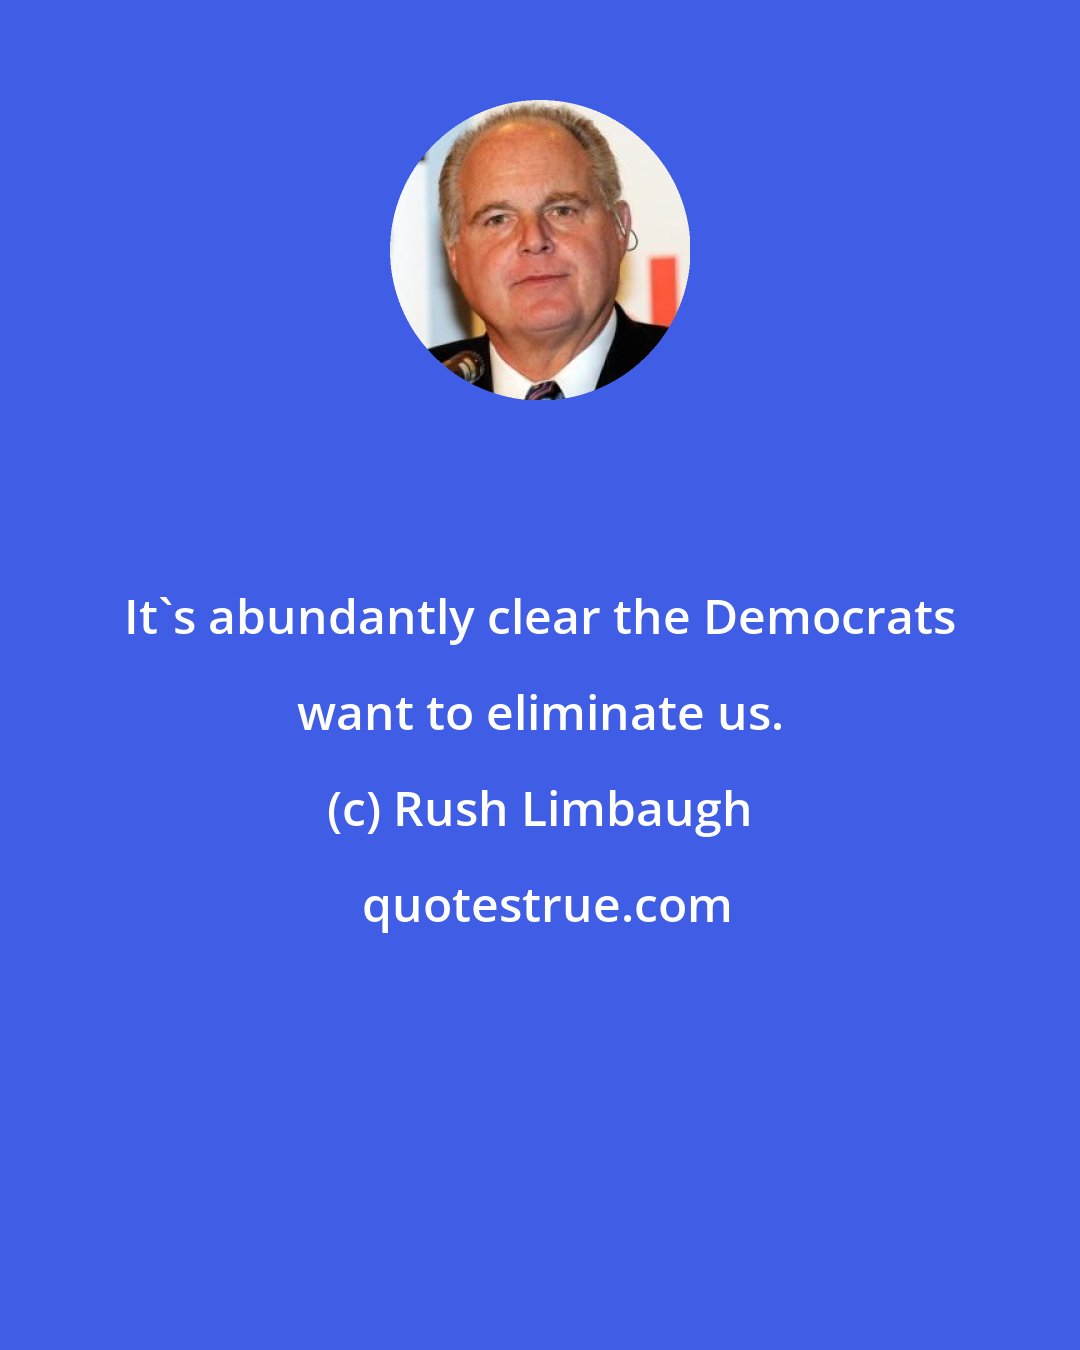 Rush Limbaugh: It's abundantly clear the Democrats want to eliminate us.